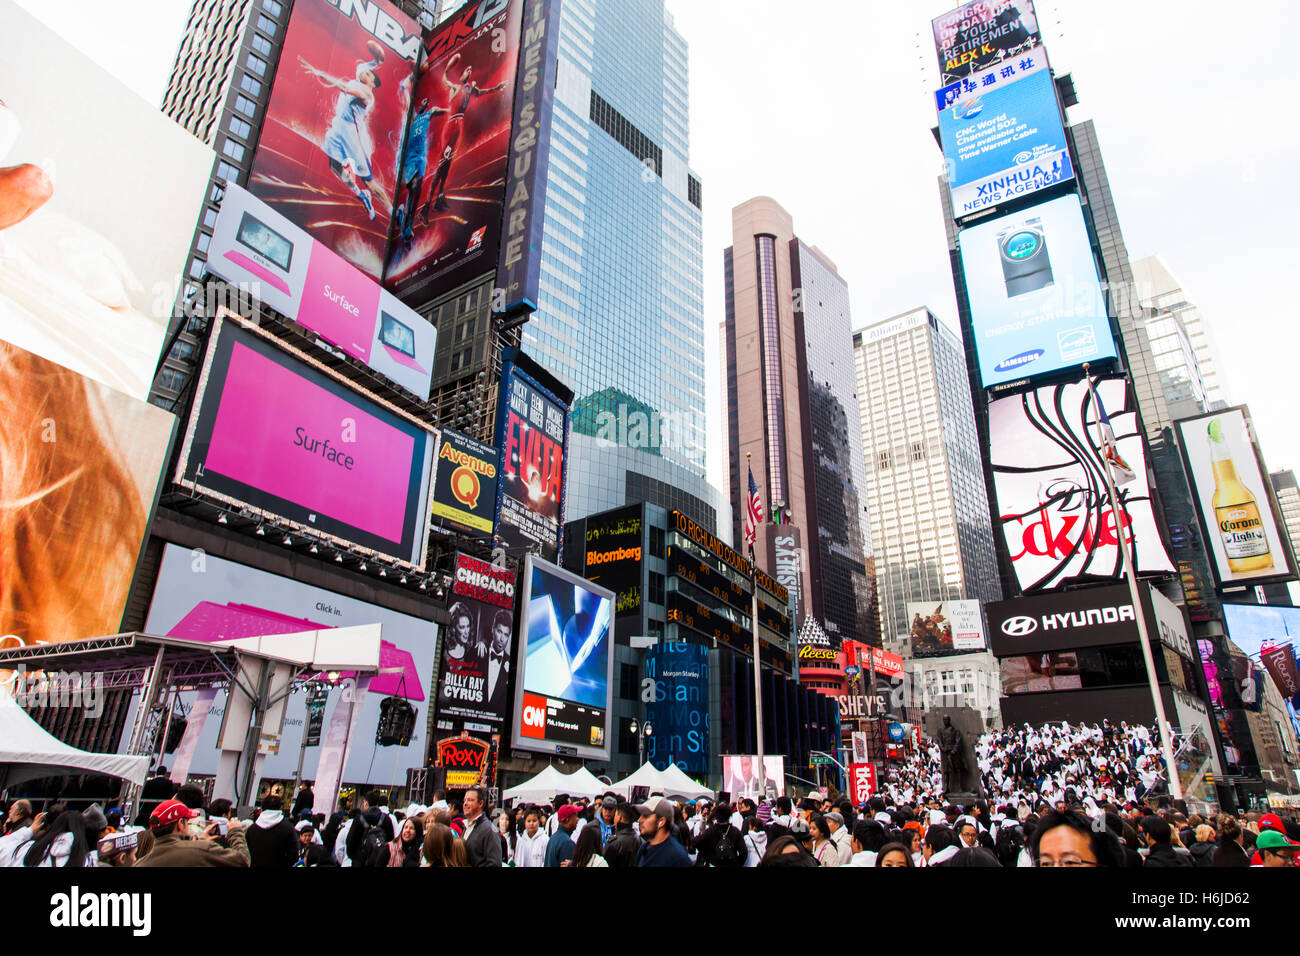 New-York, USA - NOV 20: Large crowd packing Times Square on November 20, 2012 in New-York, USA. Stock Photo